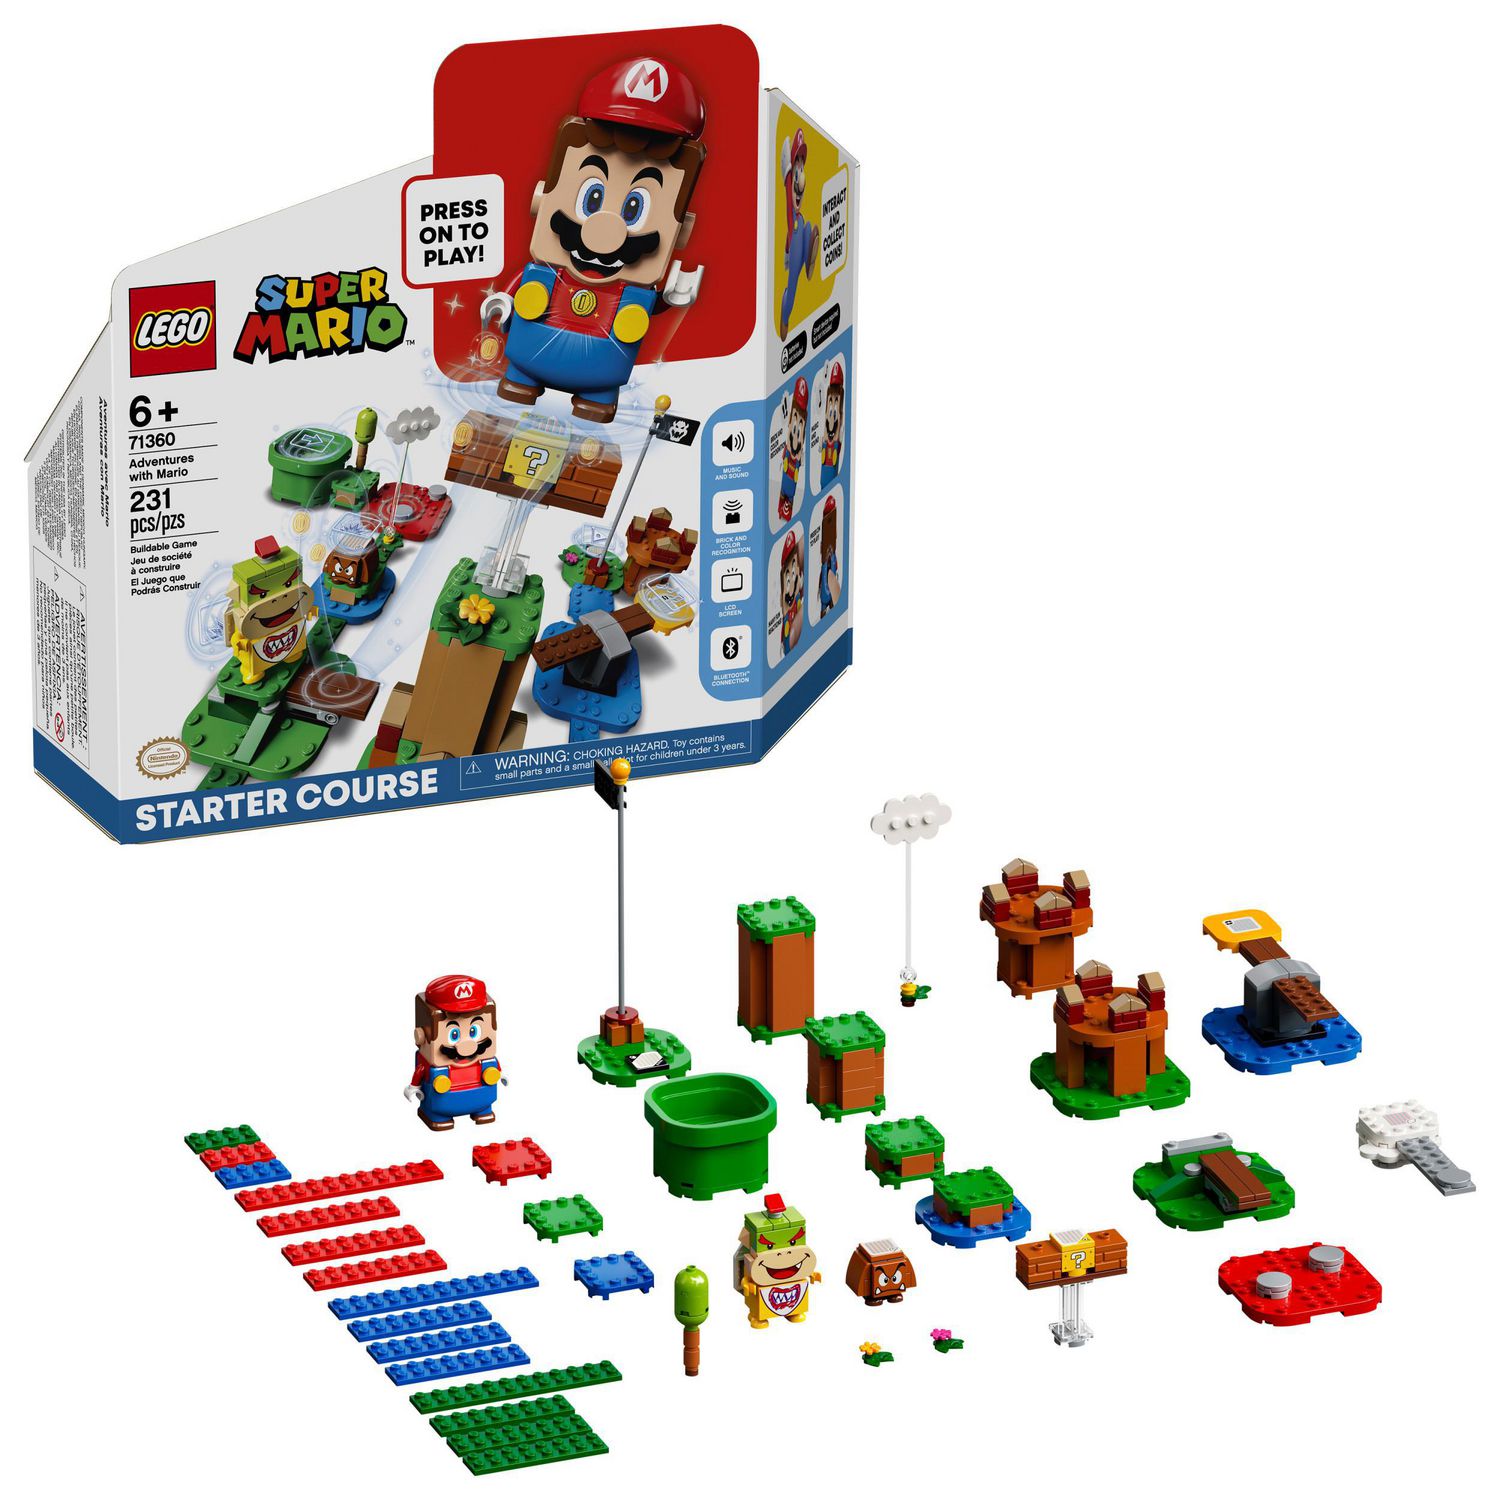 LEGO Super Mario Adventures with Mario Starter Course 71360 Toy Building  Kit, Includes 231 Pieces, ages 6+